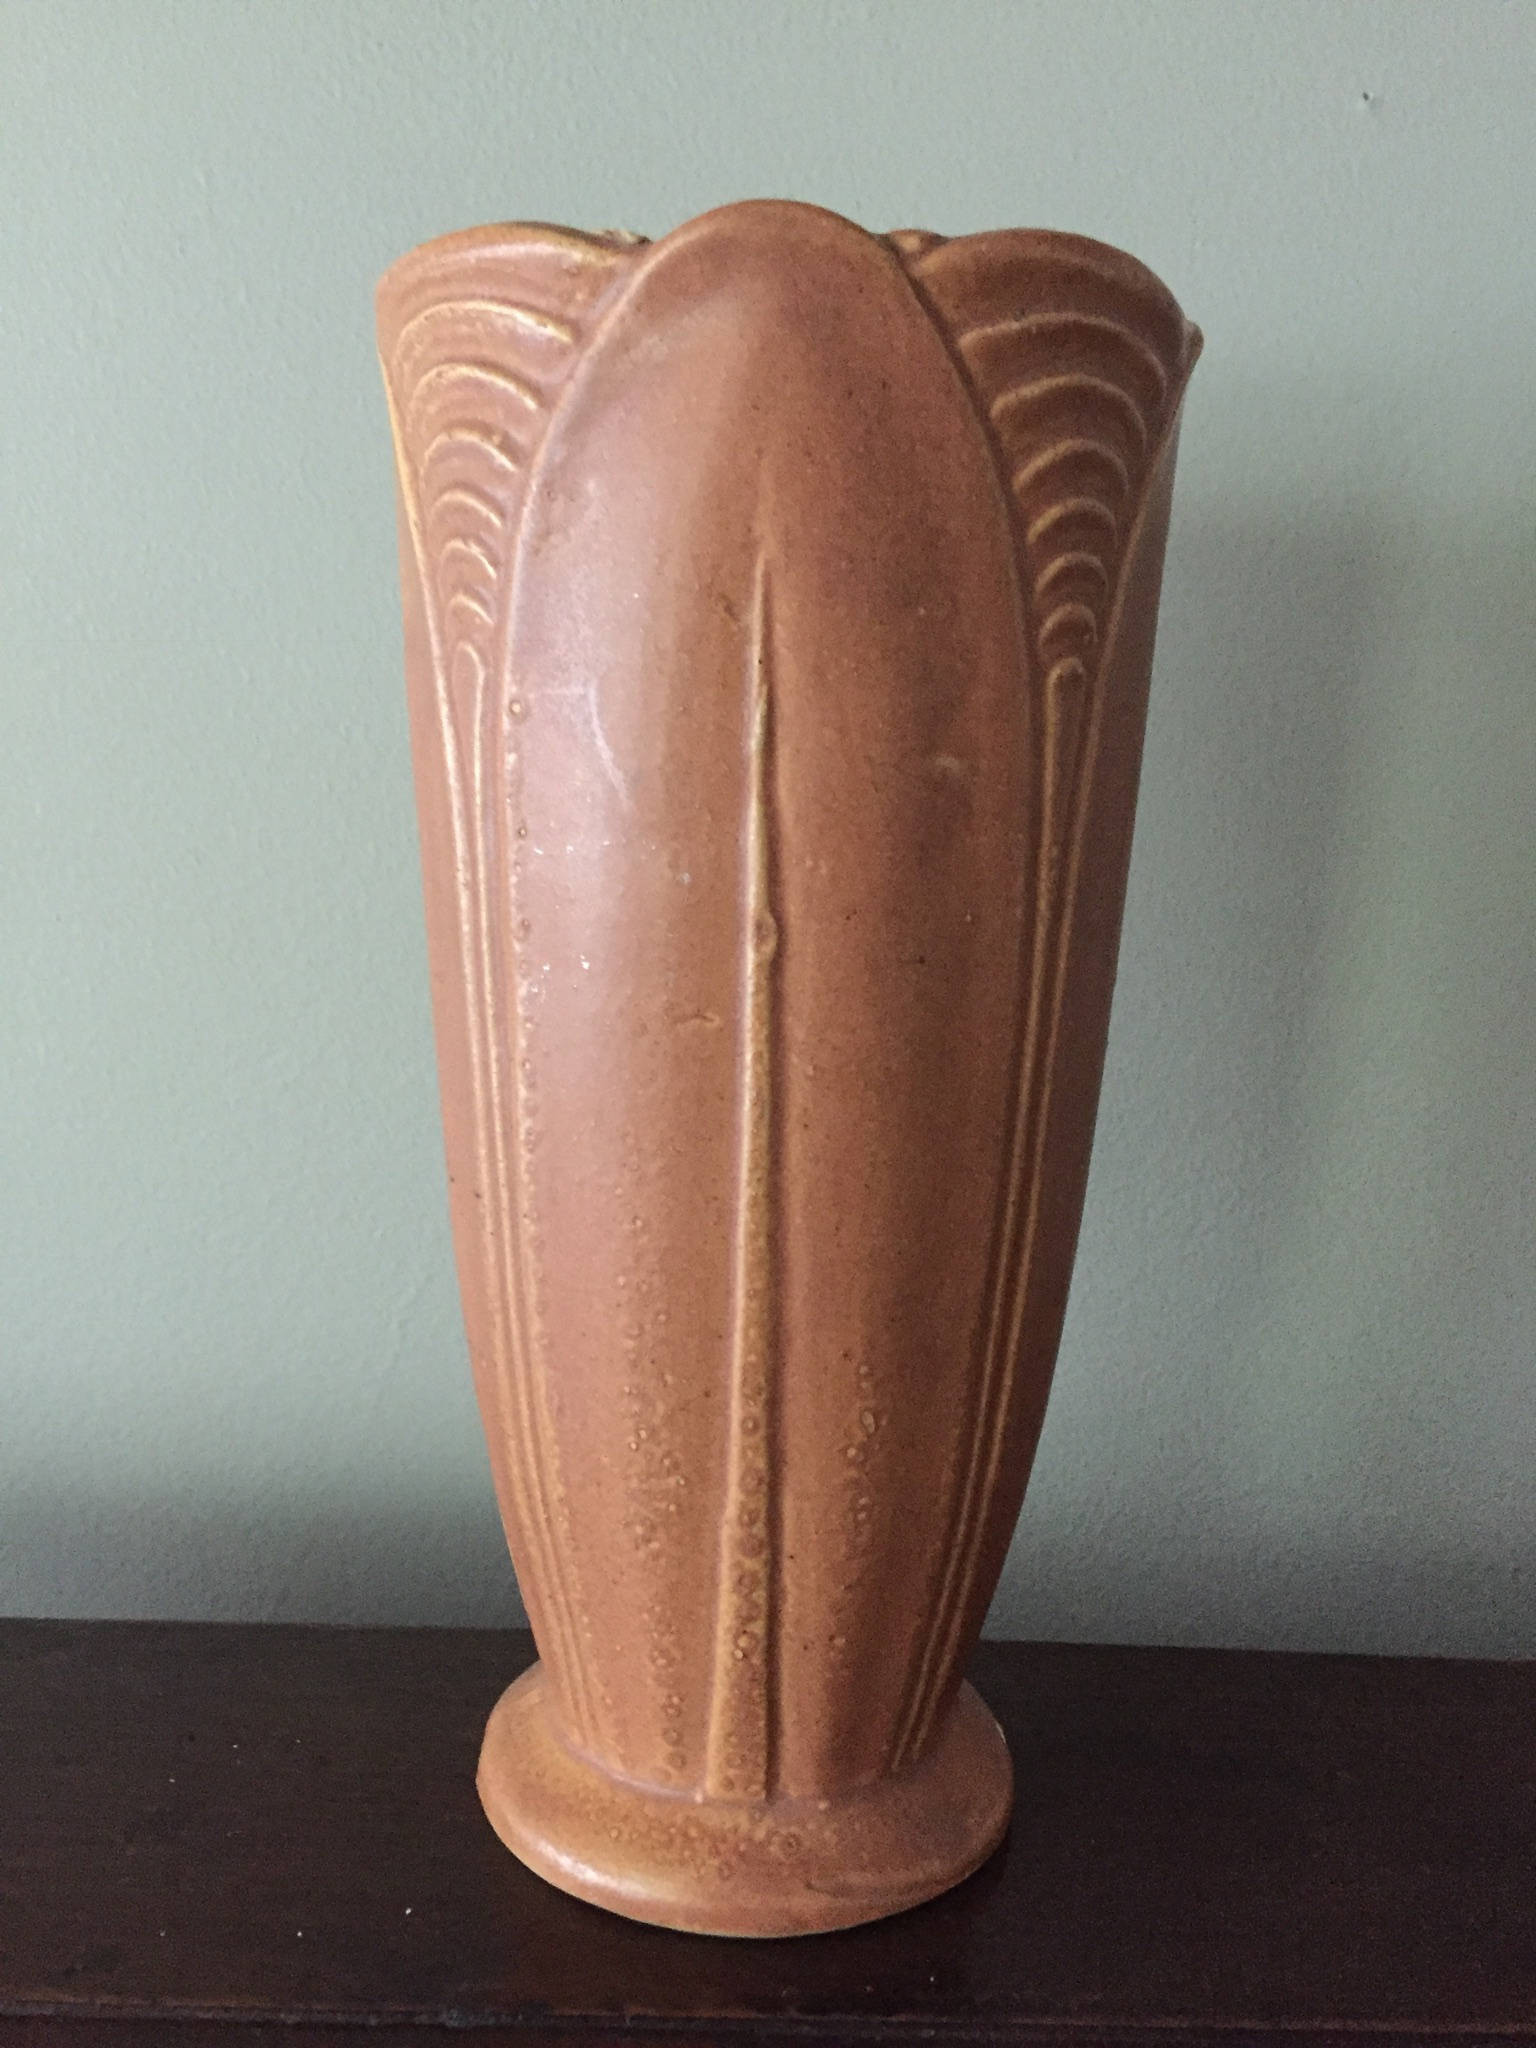 27 Great Antique Hyacinth Vases for Sale 2024 free download antique hyacinth vases for sale of vintage vase terra cotta colored unglazed pottery unmarked etsy in dc29fc294c28ezoom